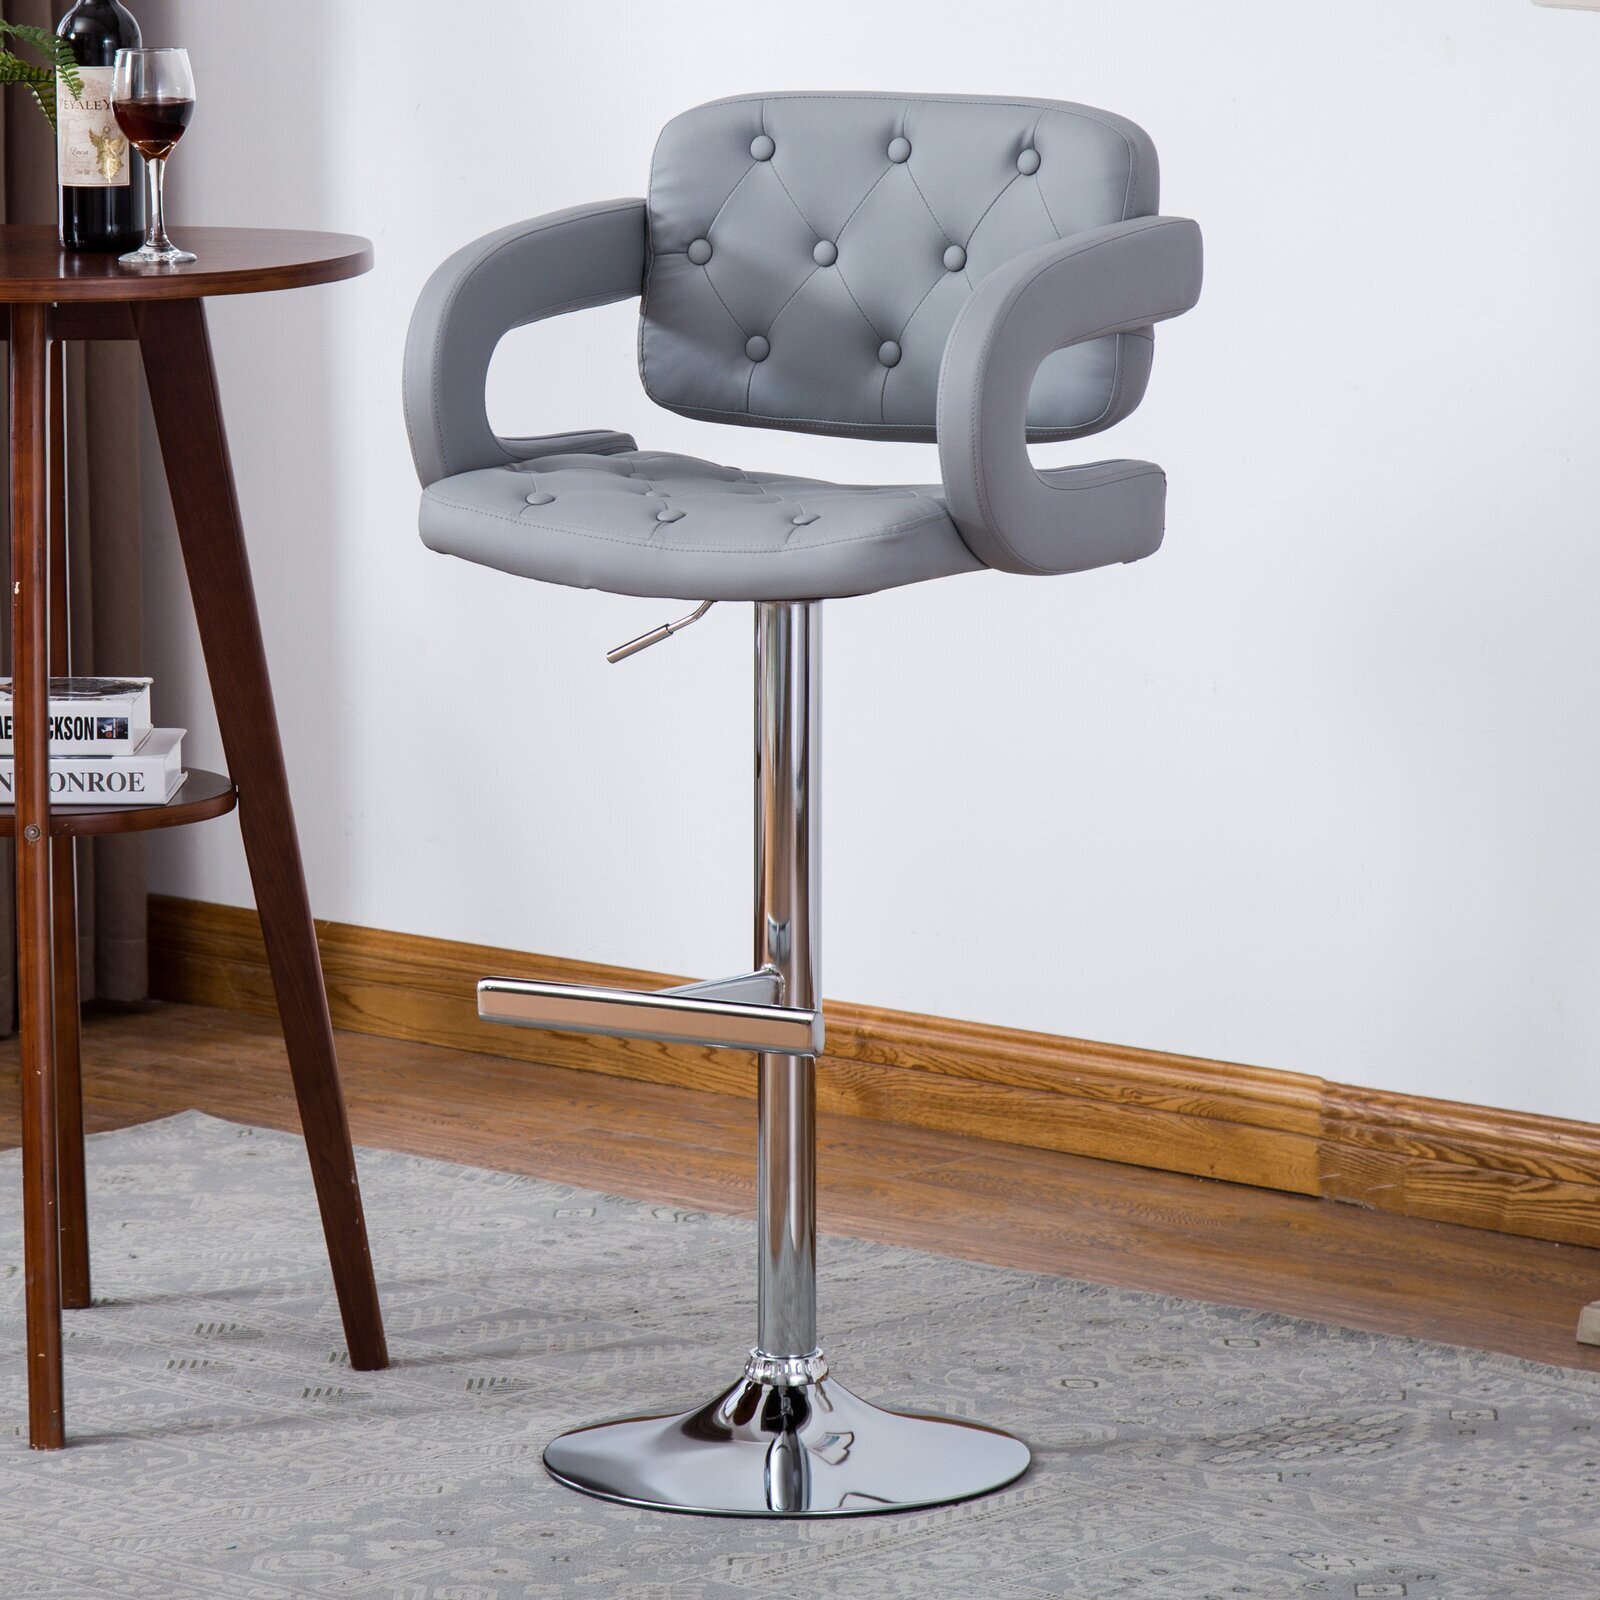 Fully padded, comfortable bar stools with backs and arms